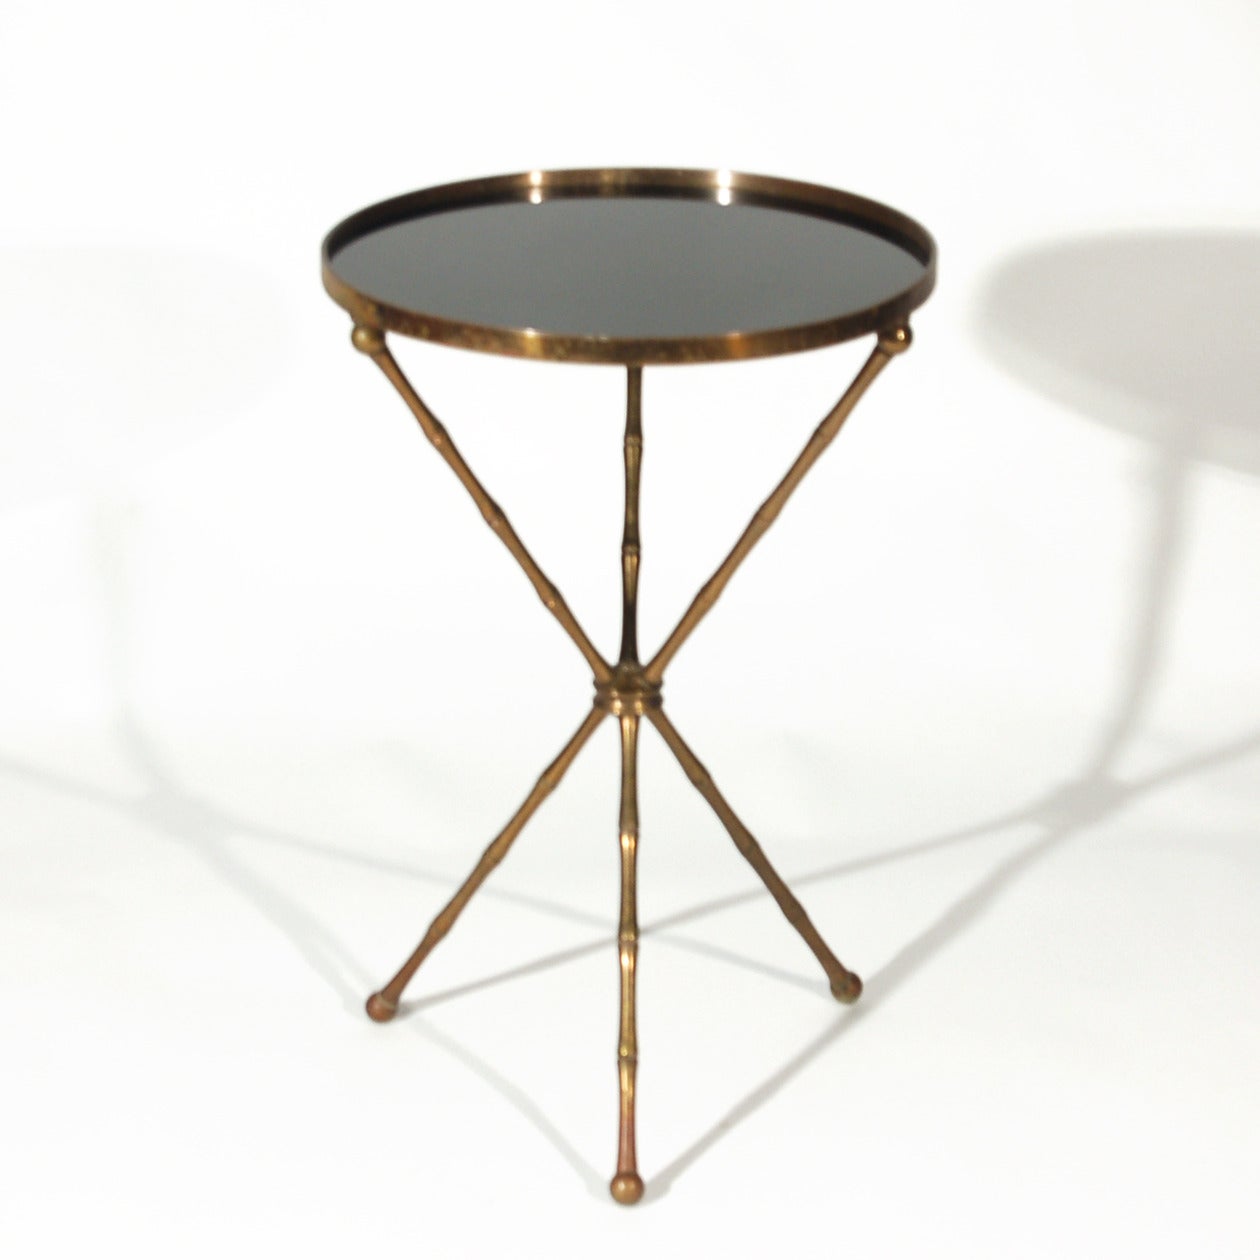 A beautiful vintage brass tripod form table with faux bamboo legs. Very much in the Maison Bagues style -could actually be Bagues -we can't be sure. The table features black Carrara Vitrolite glass. We have left the wonderful patina as-is. This